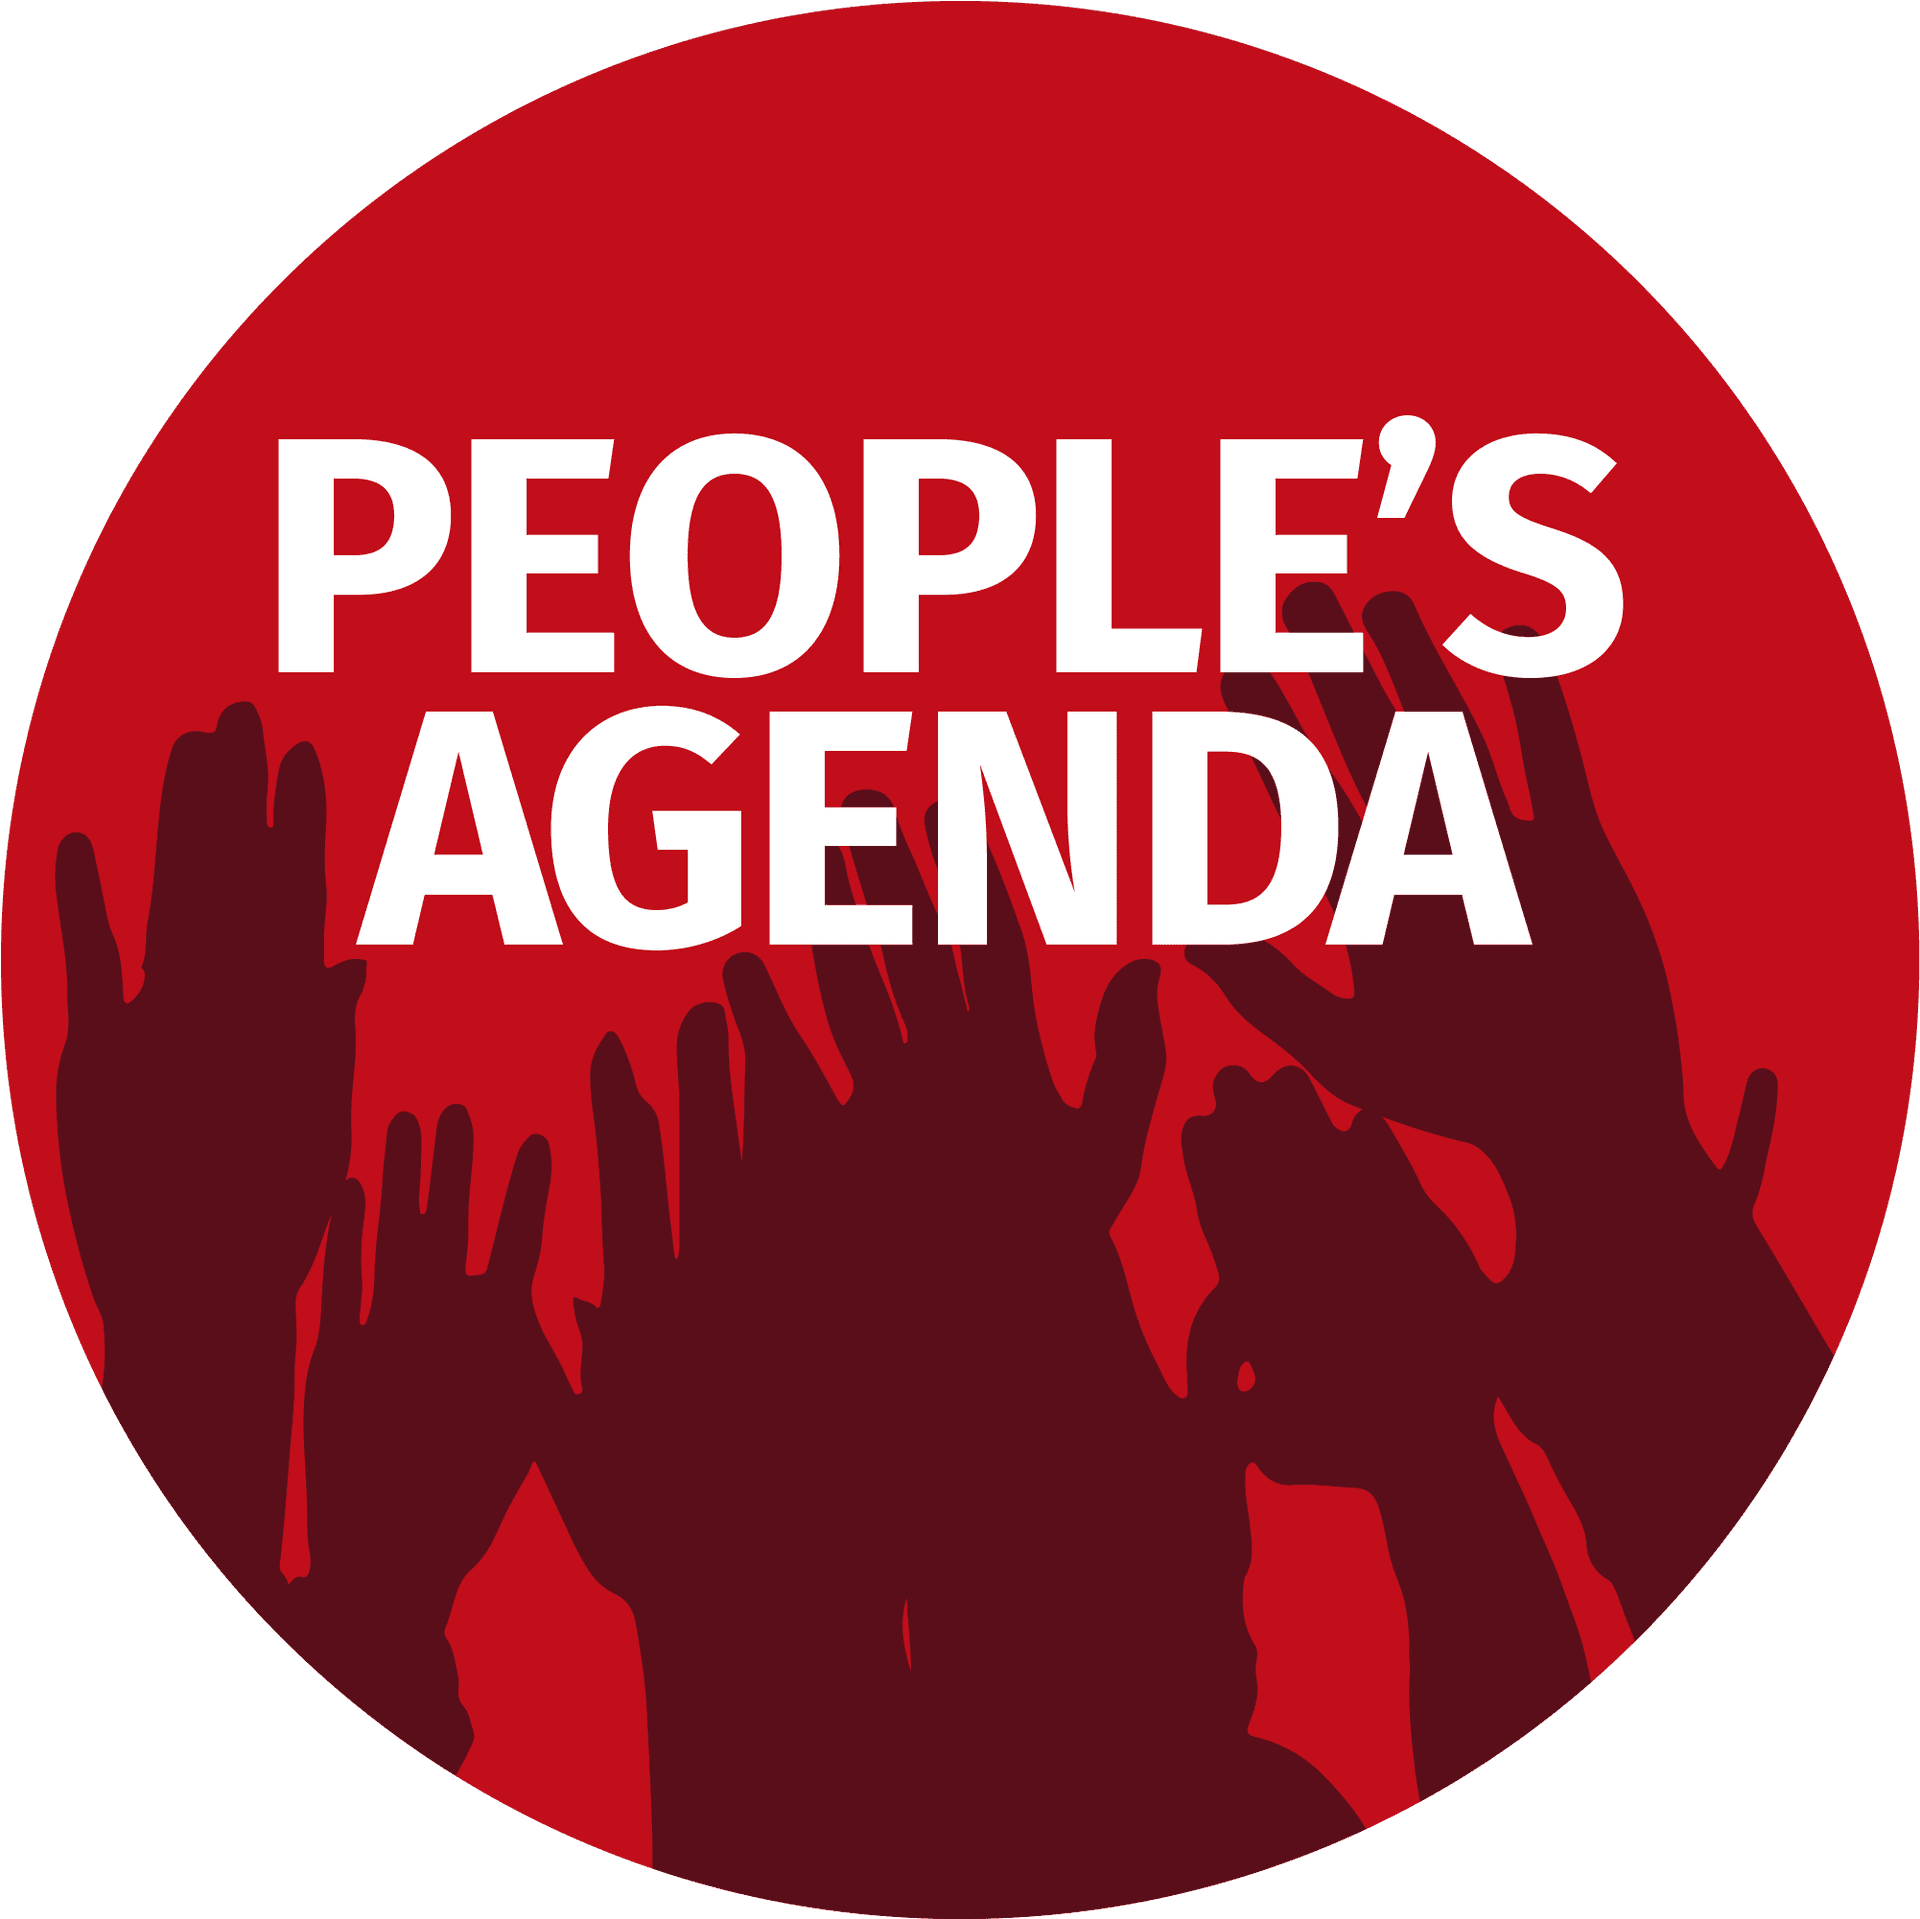 Peoples Agenda Rally Sign PNG